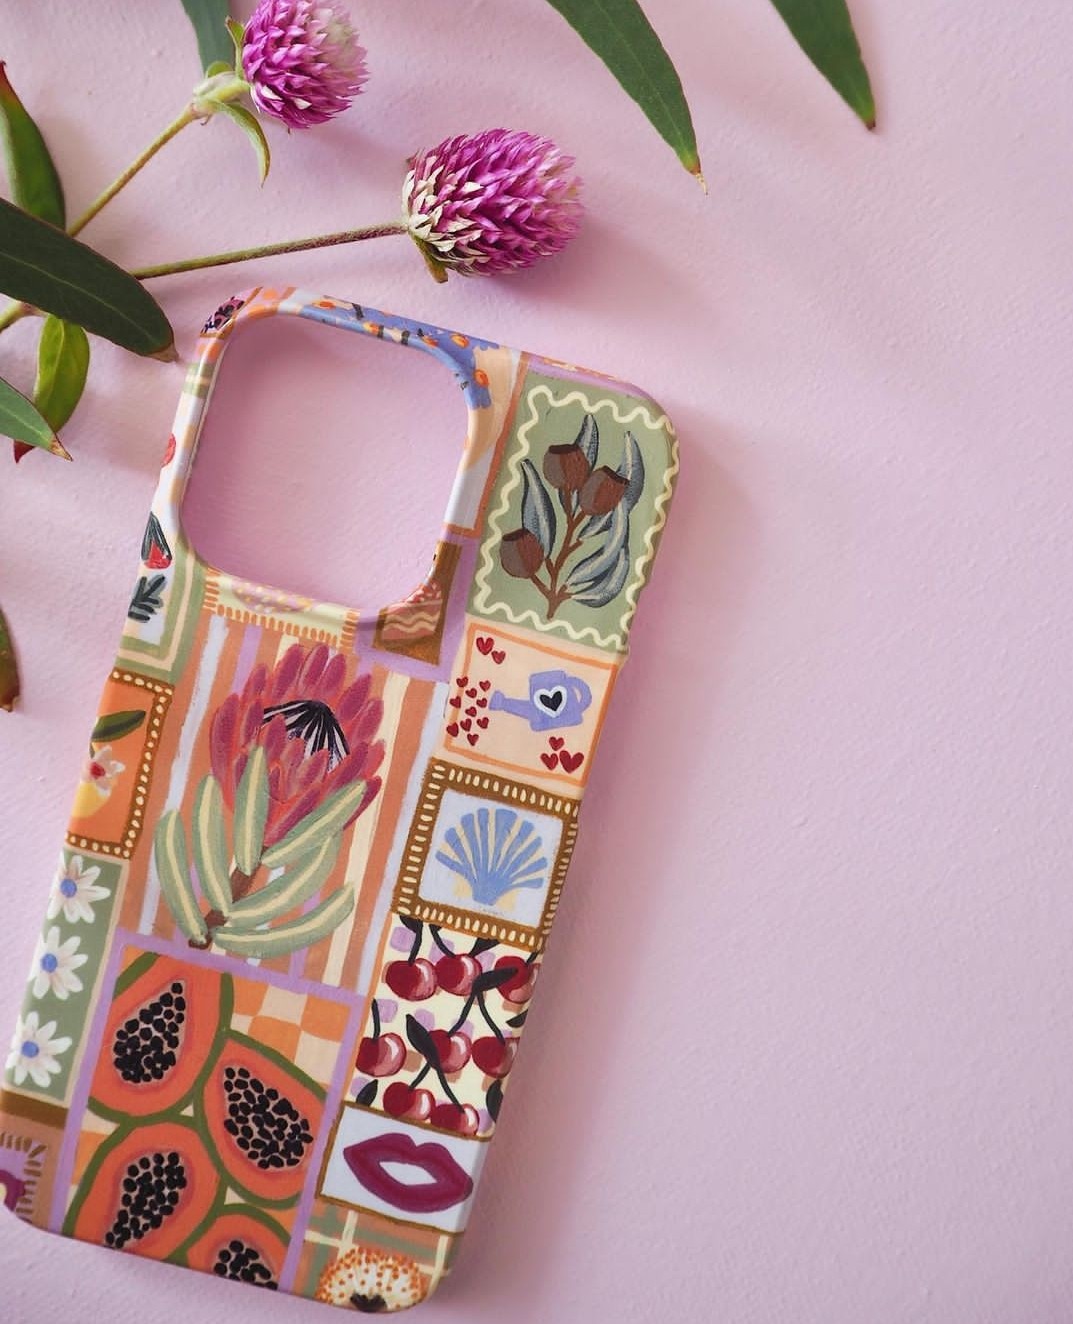 Printed phone case using artwork from Amy Gibbs